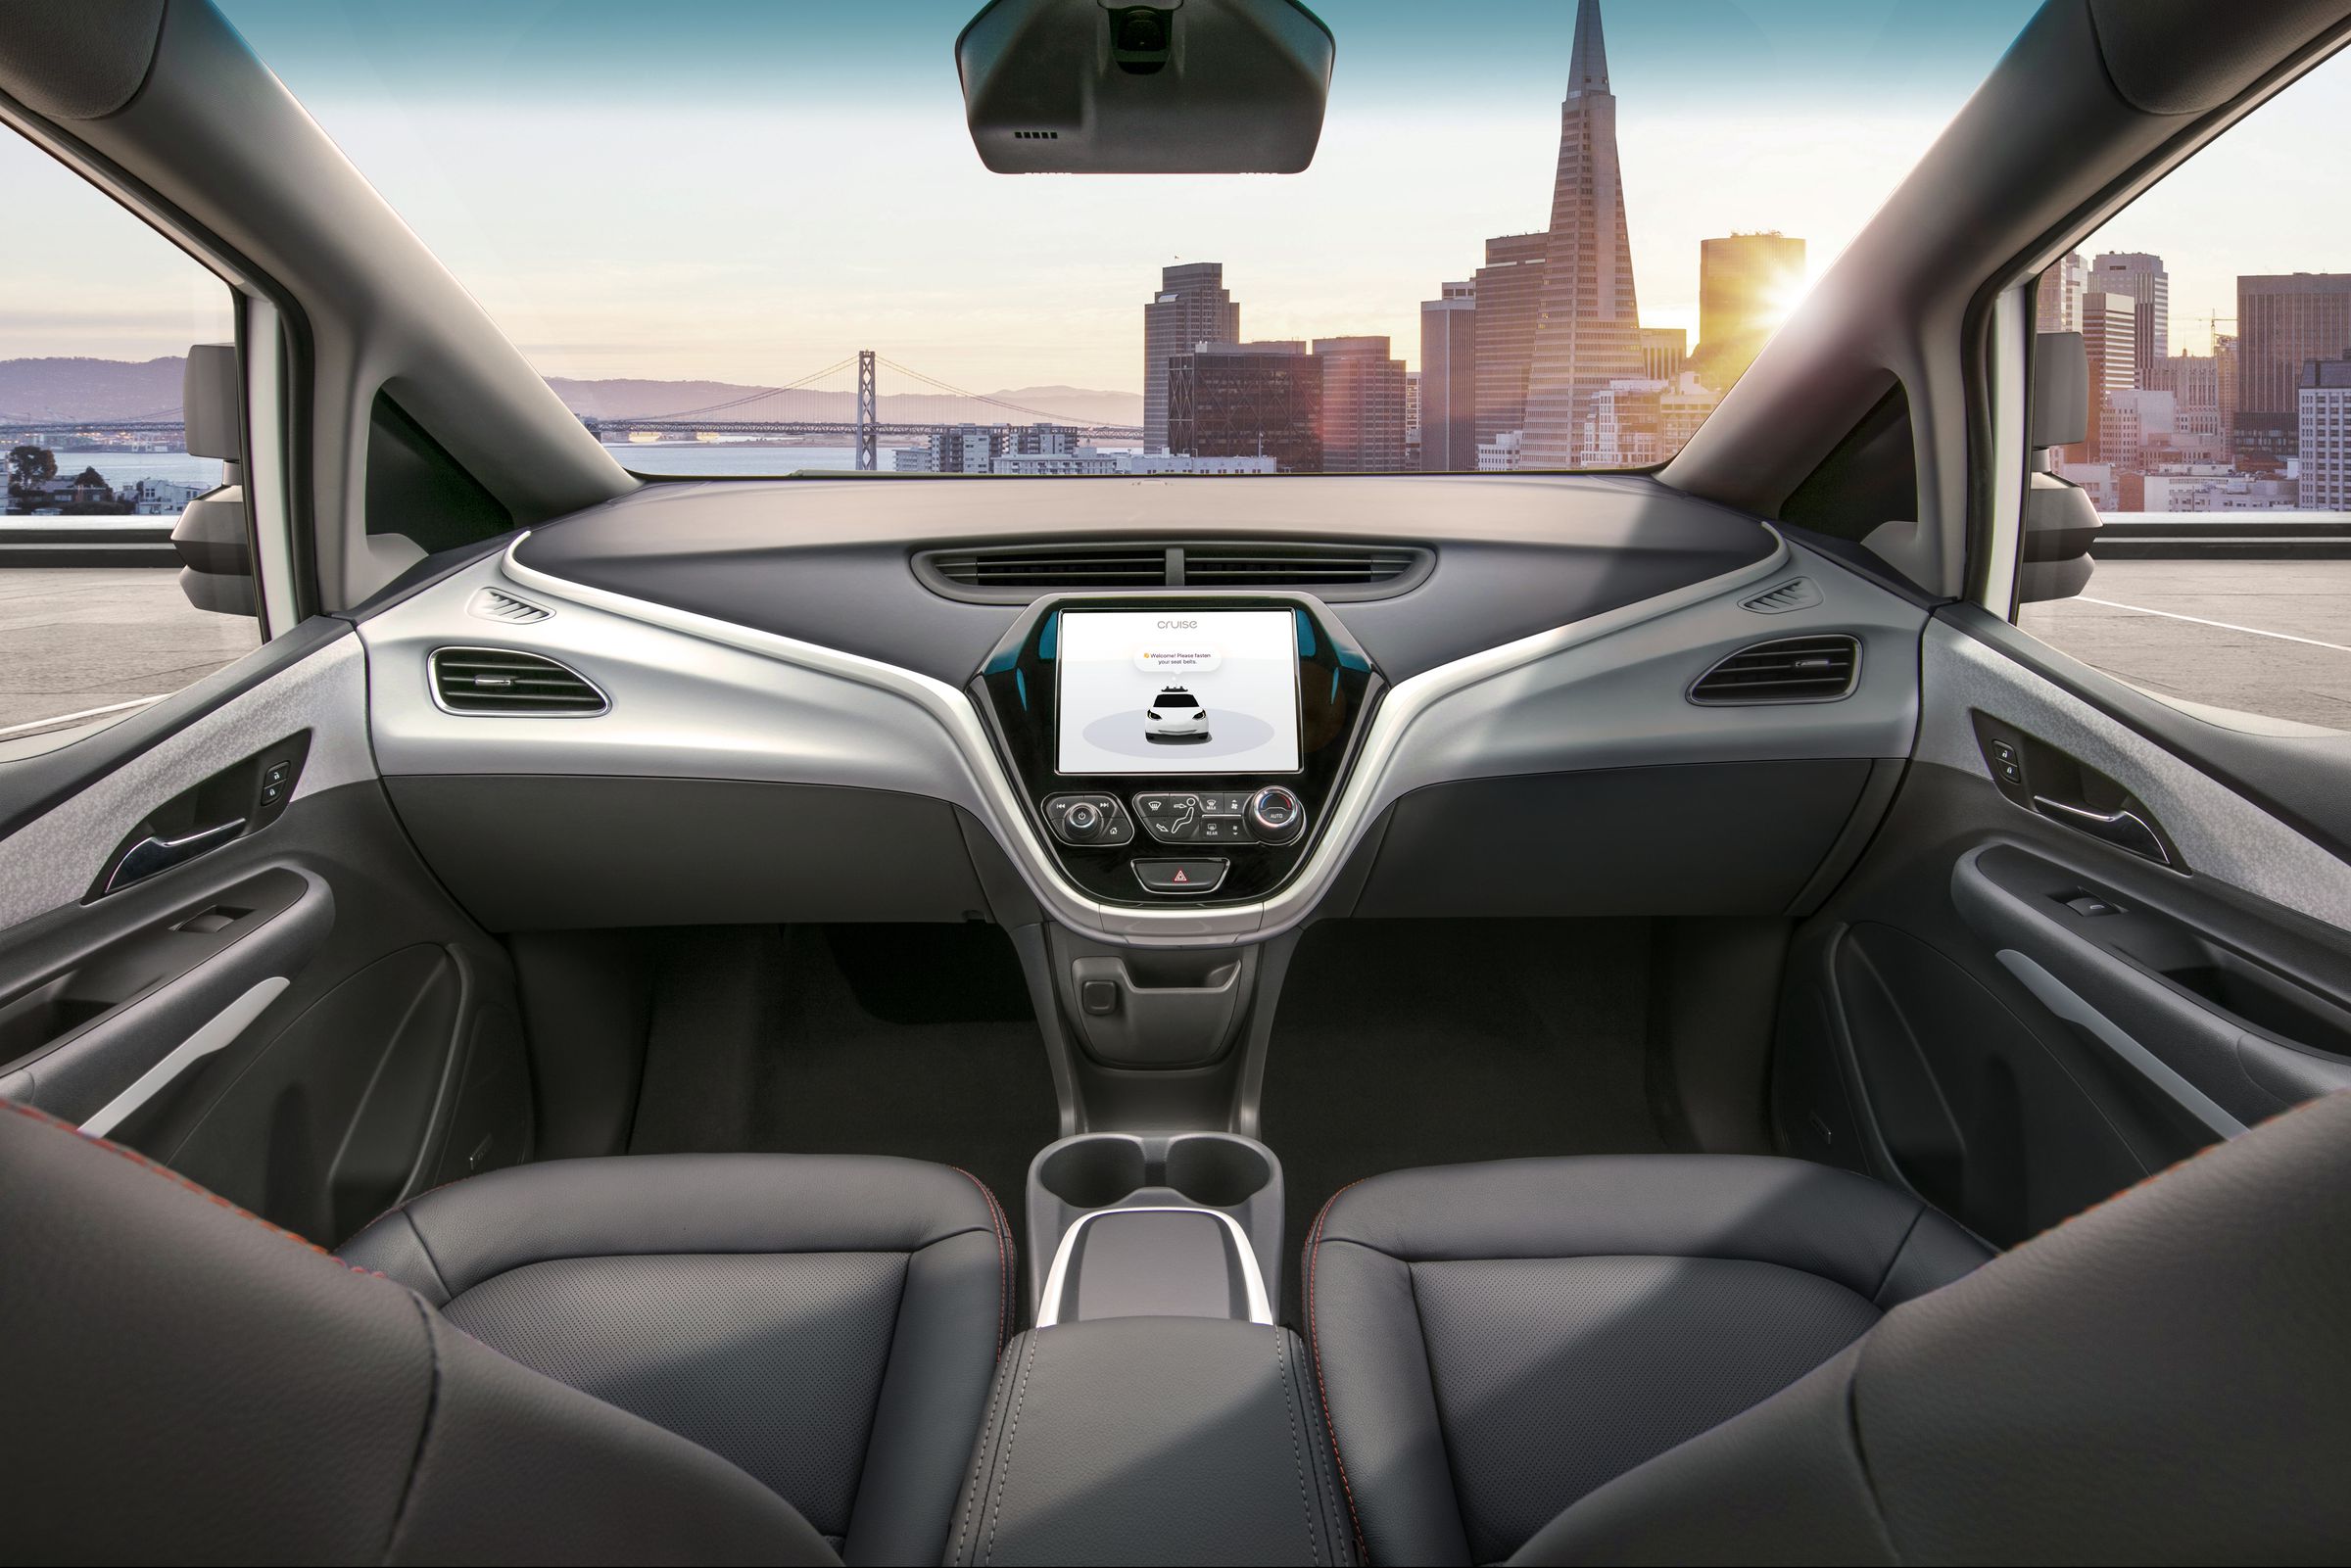 GM is designing all-electric Chevy Bolts with no steering wheel or pedals, and will launch a commercial trial with the Bolts it has retrofitted with Cruise Automation’s technology in 2019.